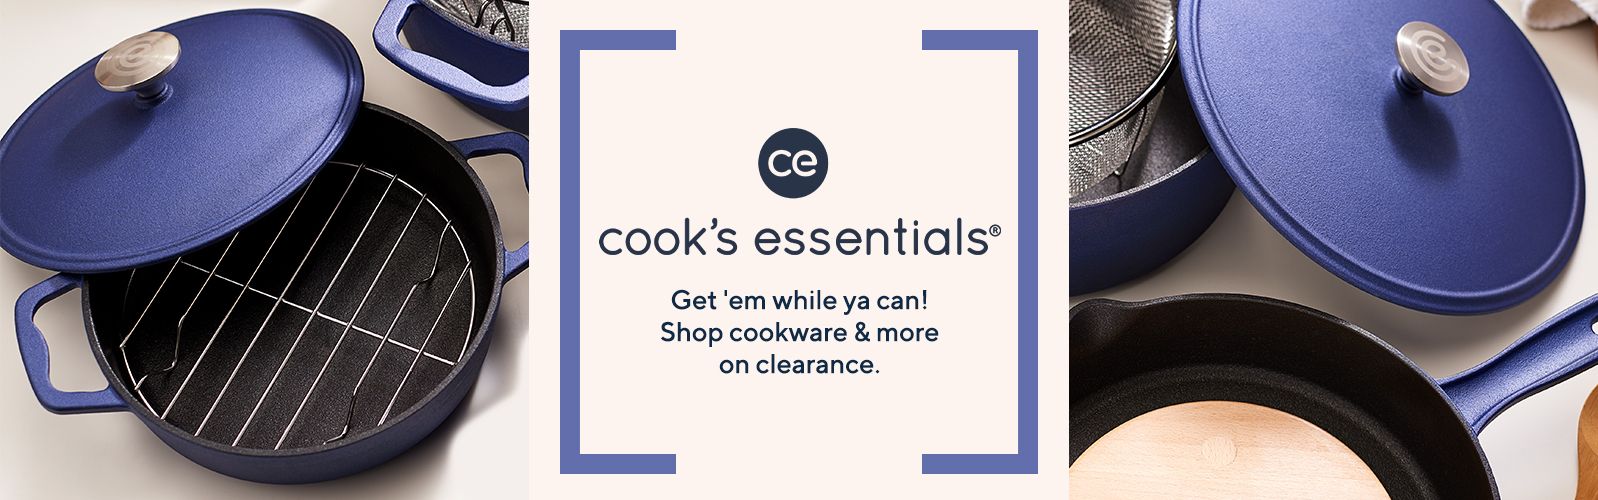 Cook's Essentials  Get 'em while ya can! Shop cookware & more on clearance. 